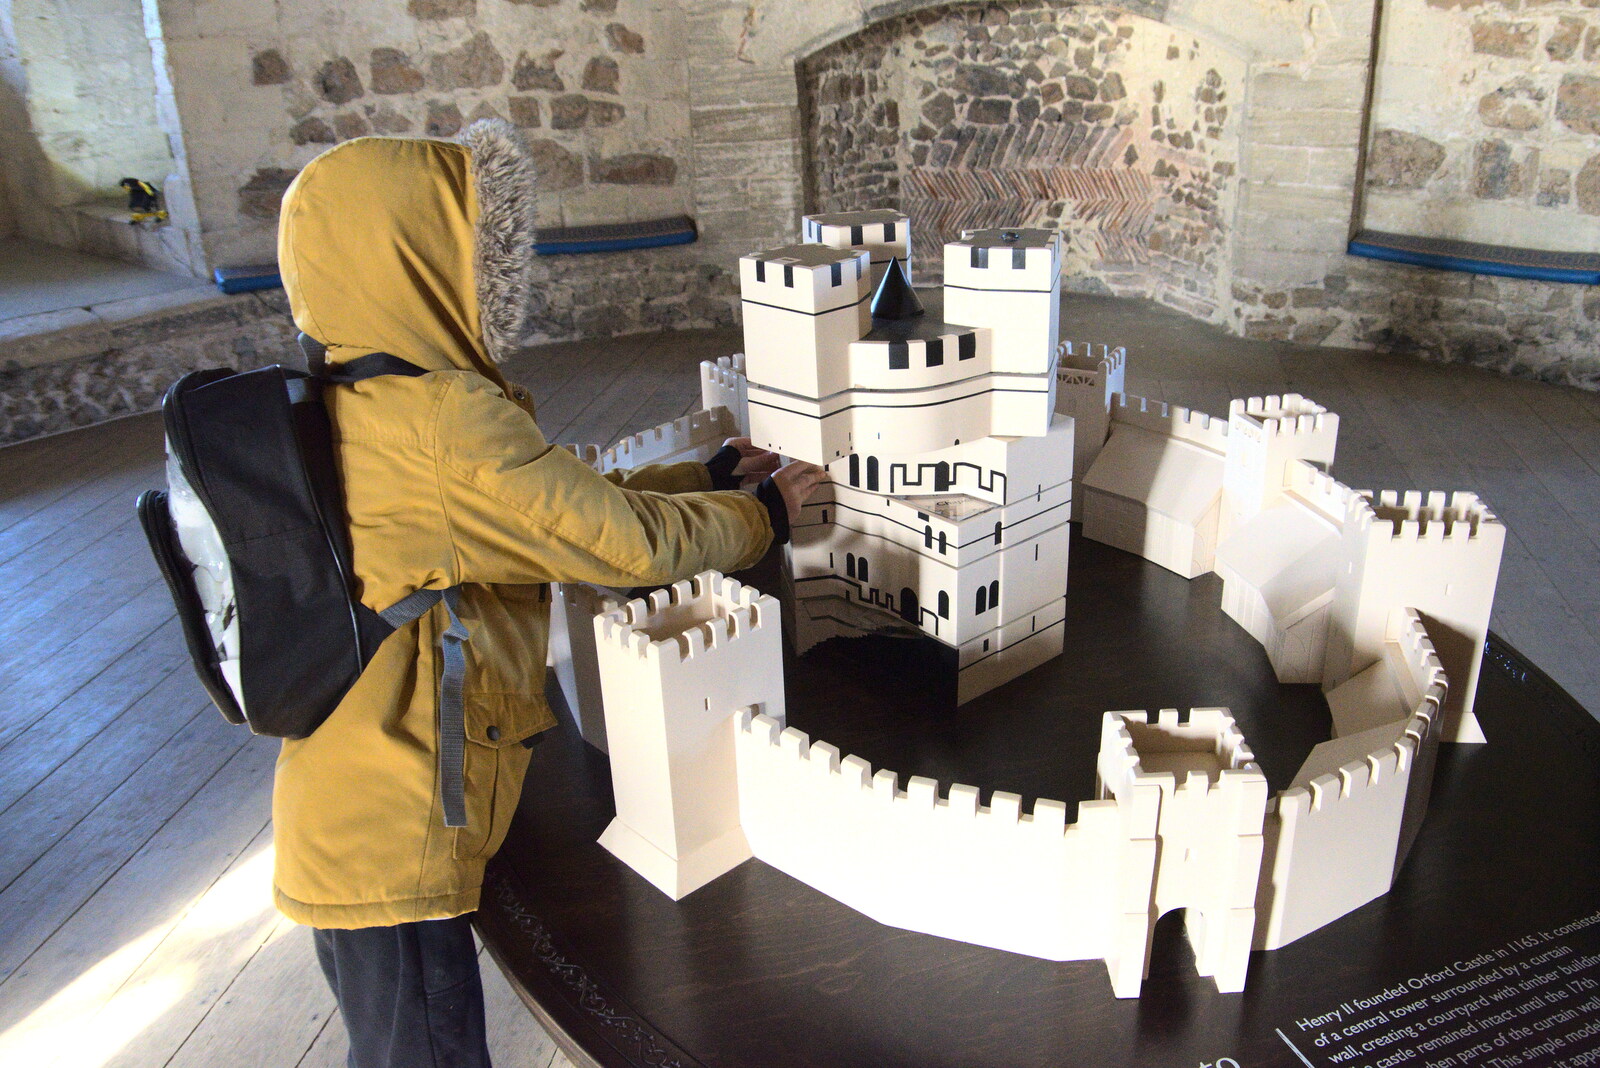 There's an interactive model of the castle from A Trip to Orford Castle, Orford, Suffolk - 26th February 2022